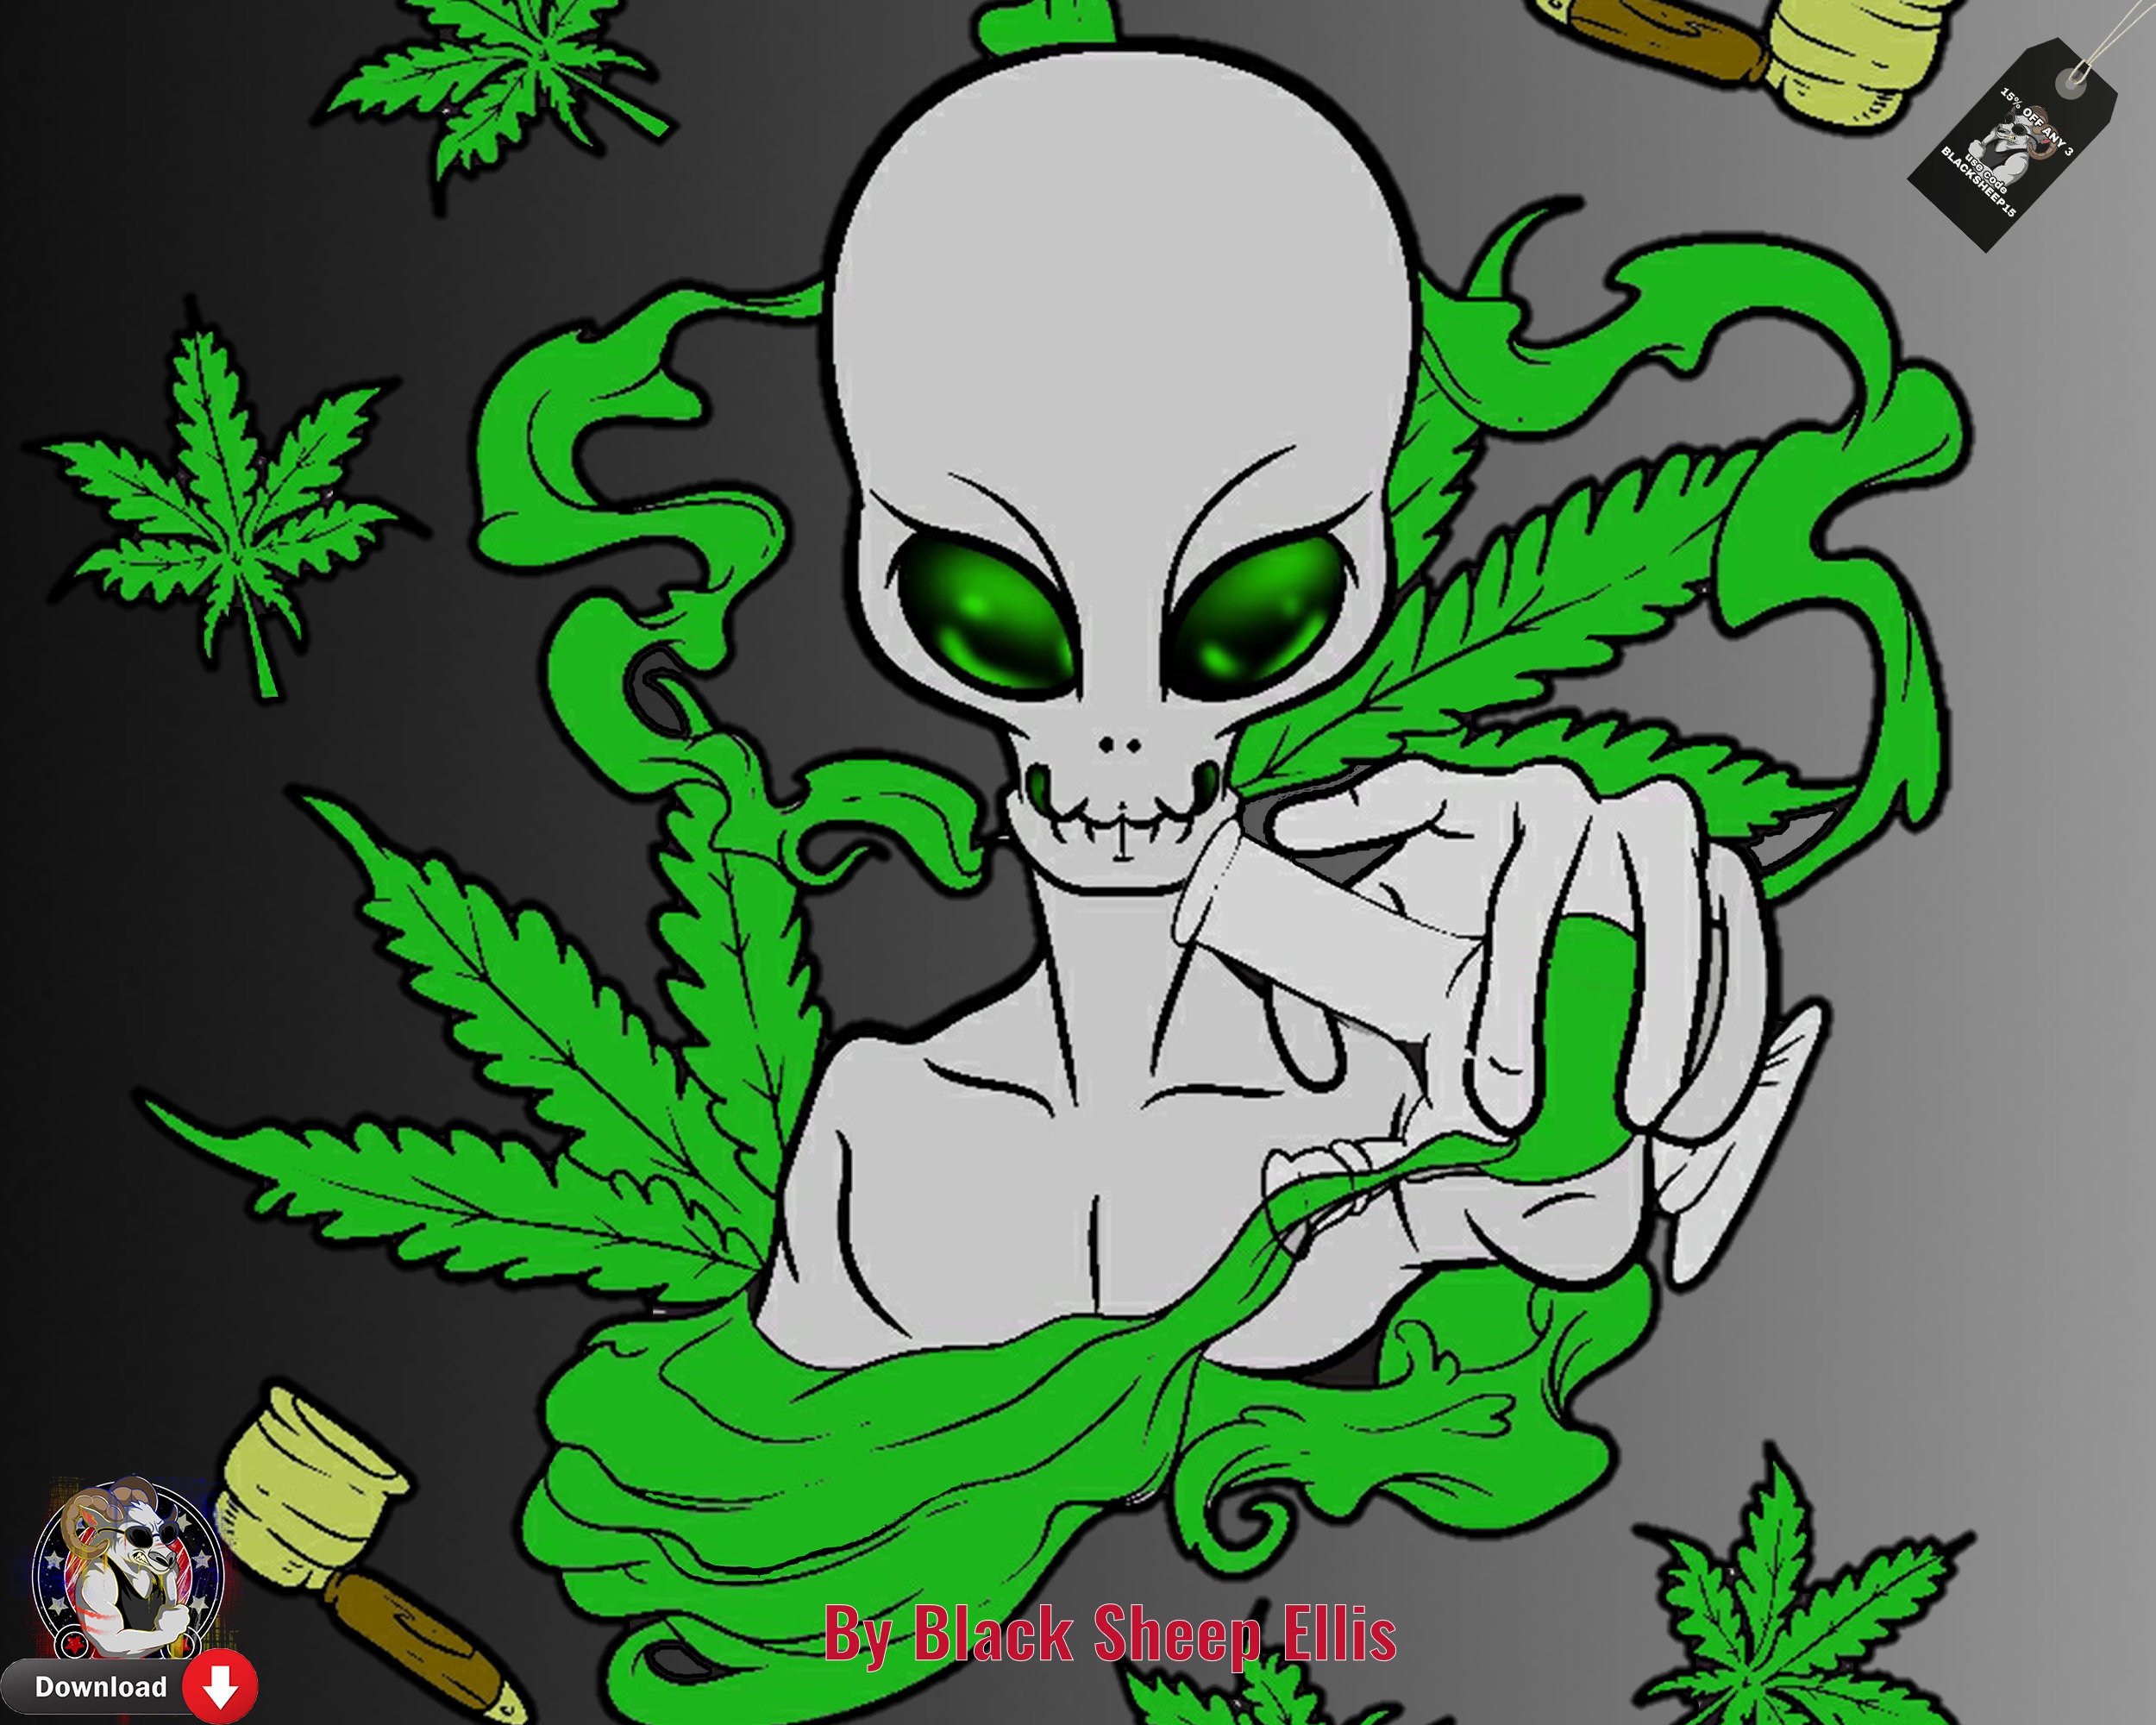 Trippy weed art from 420 Pixels